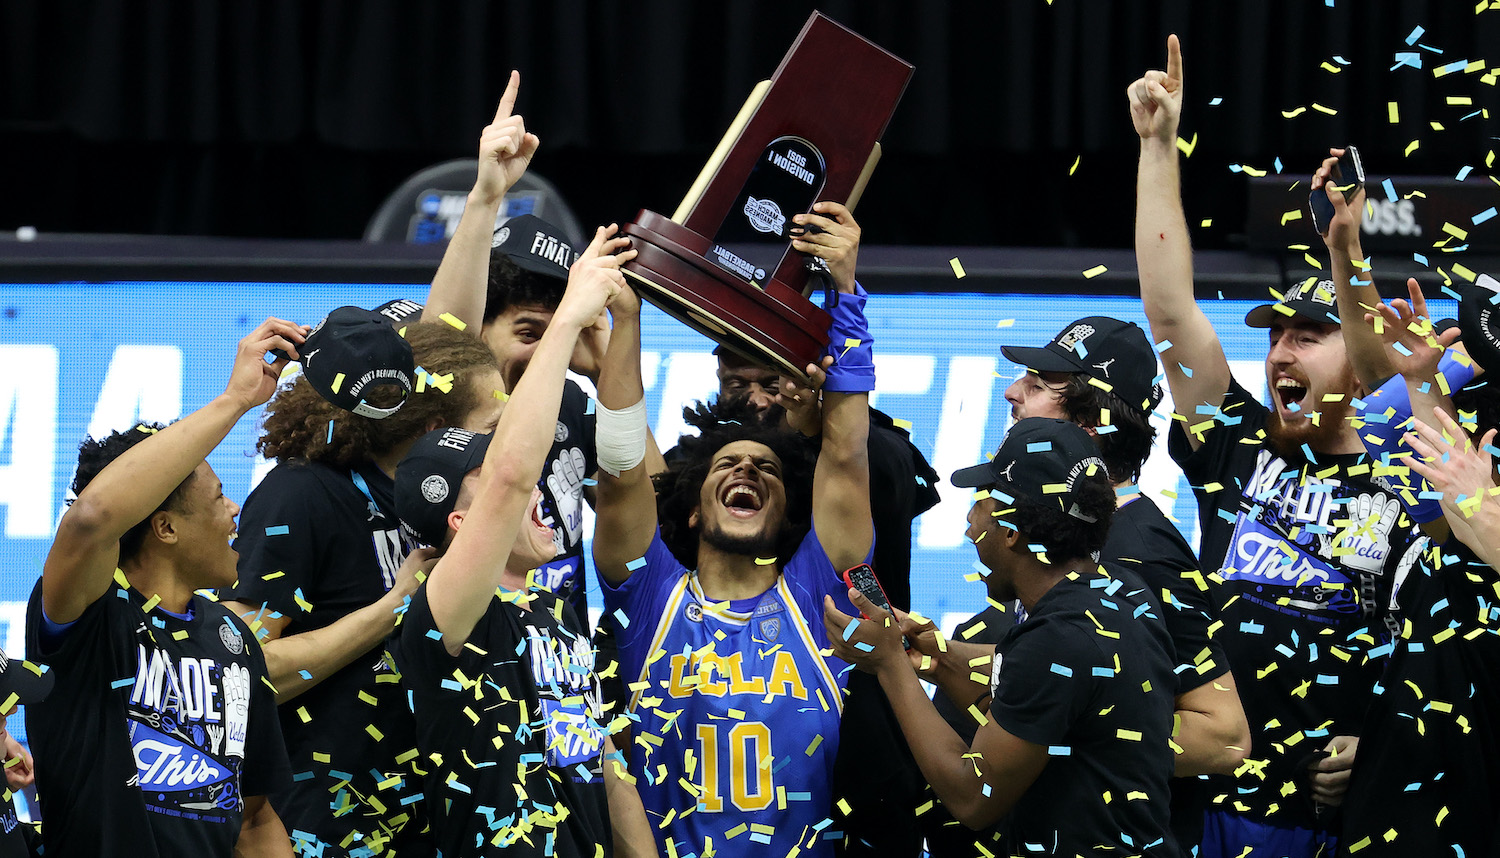 INDIANAPOLIS, INDIANA - MARCH 30: Tyger Campbell #10 of the UCLA Bruins celebrates with the East Regional Champion trophy after defeating the Michigan Wolverines 51-49 in the Elite Eight round game of the 2021 NCAA Men's Basketball Tournament at Lucas Oil Stadium on March 30, 2021 in Indianapolis, Indiana. (Photo by Andy Lyons/Getty Images)